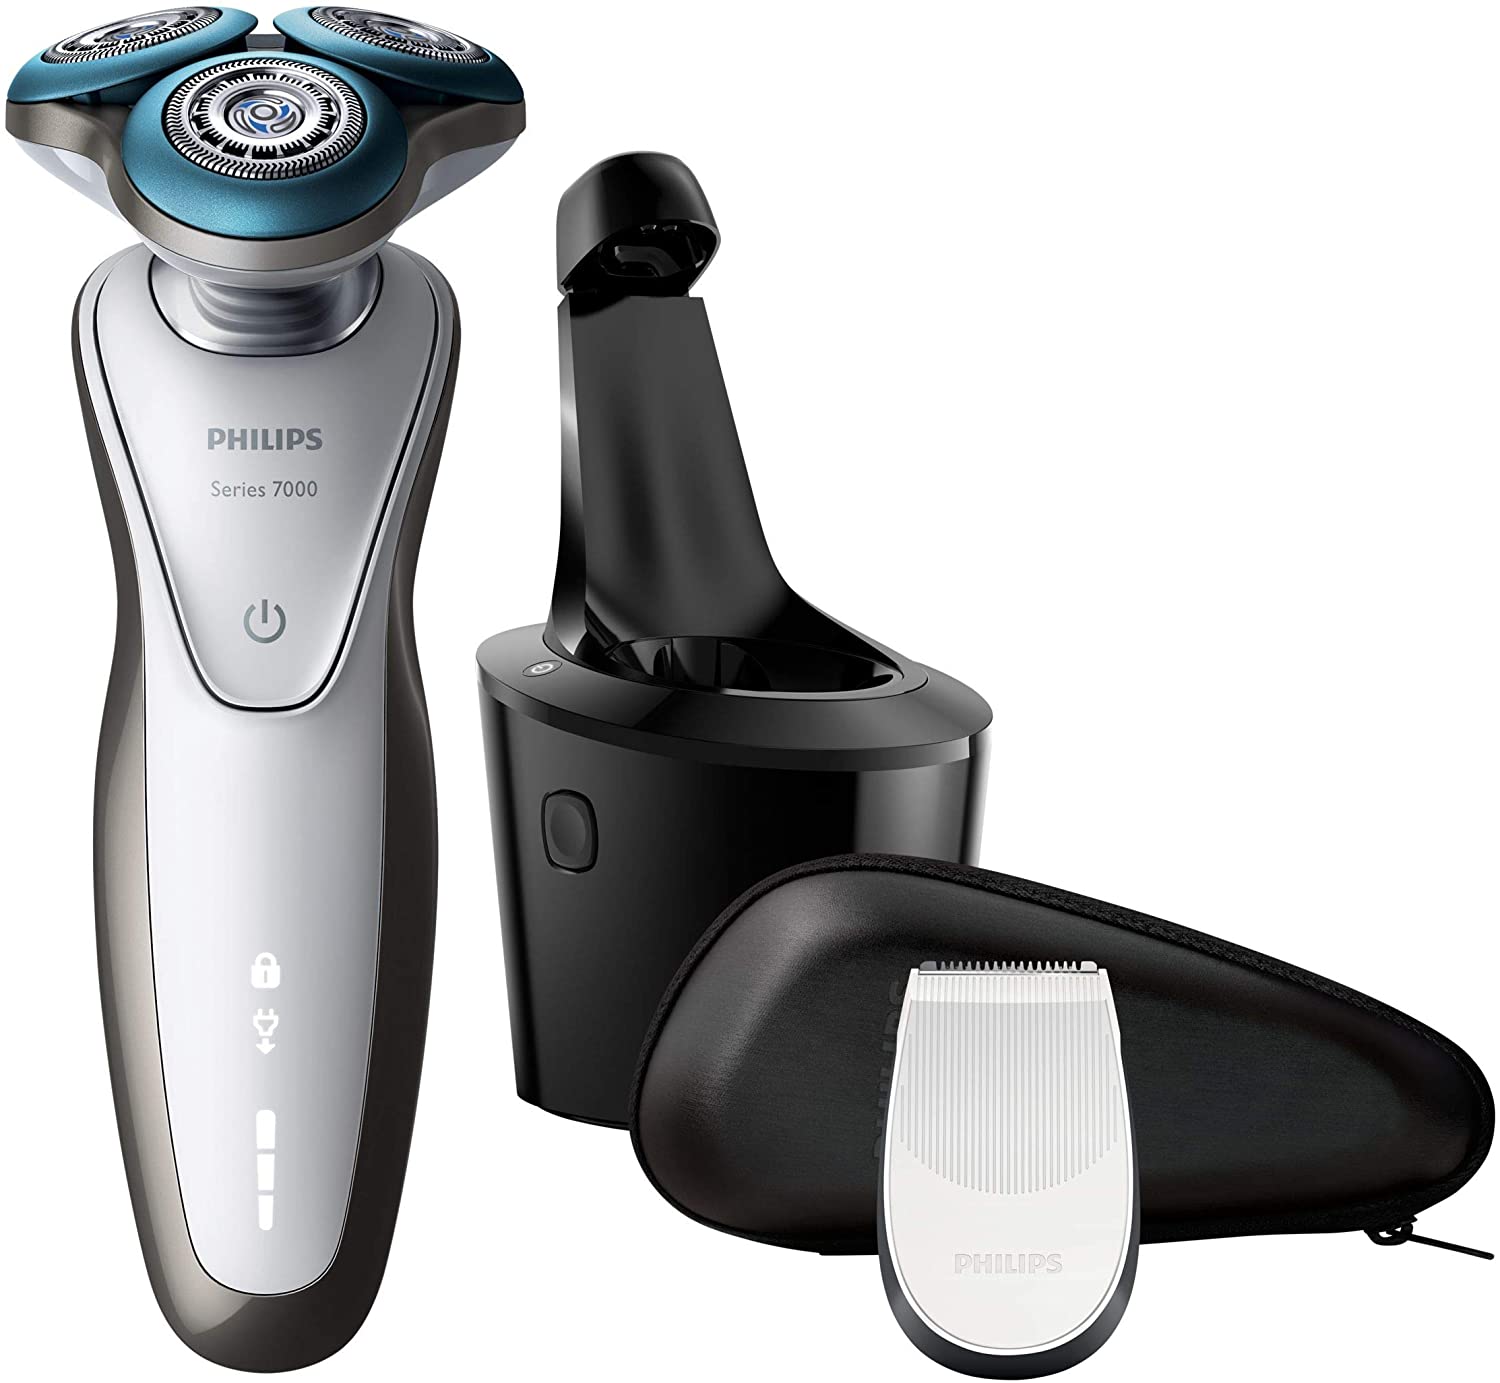 Philips Series 7000 Wet and Dry Electric Shaver in Bahrain - Halabh